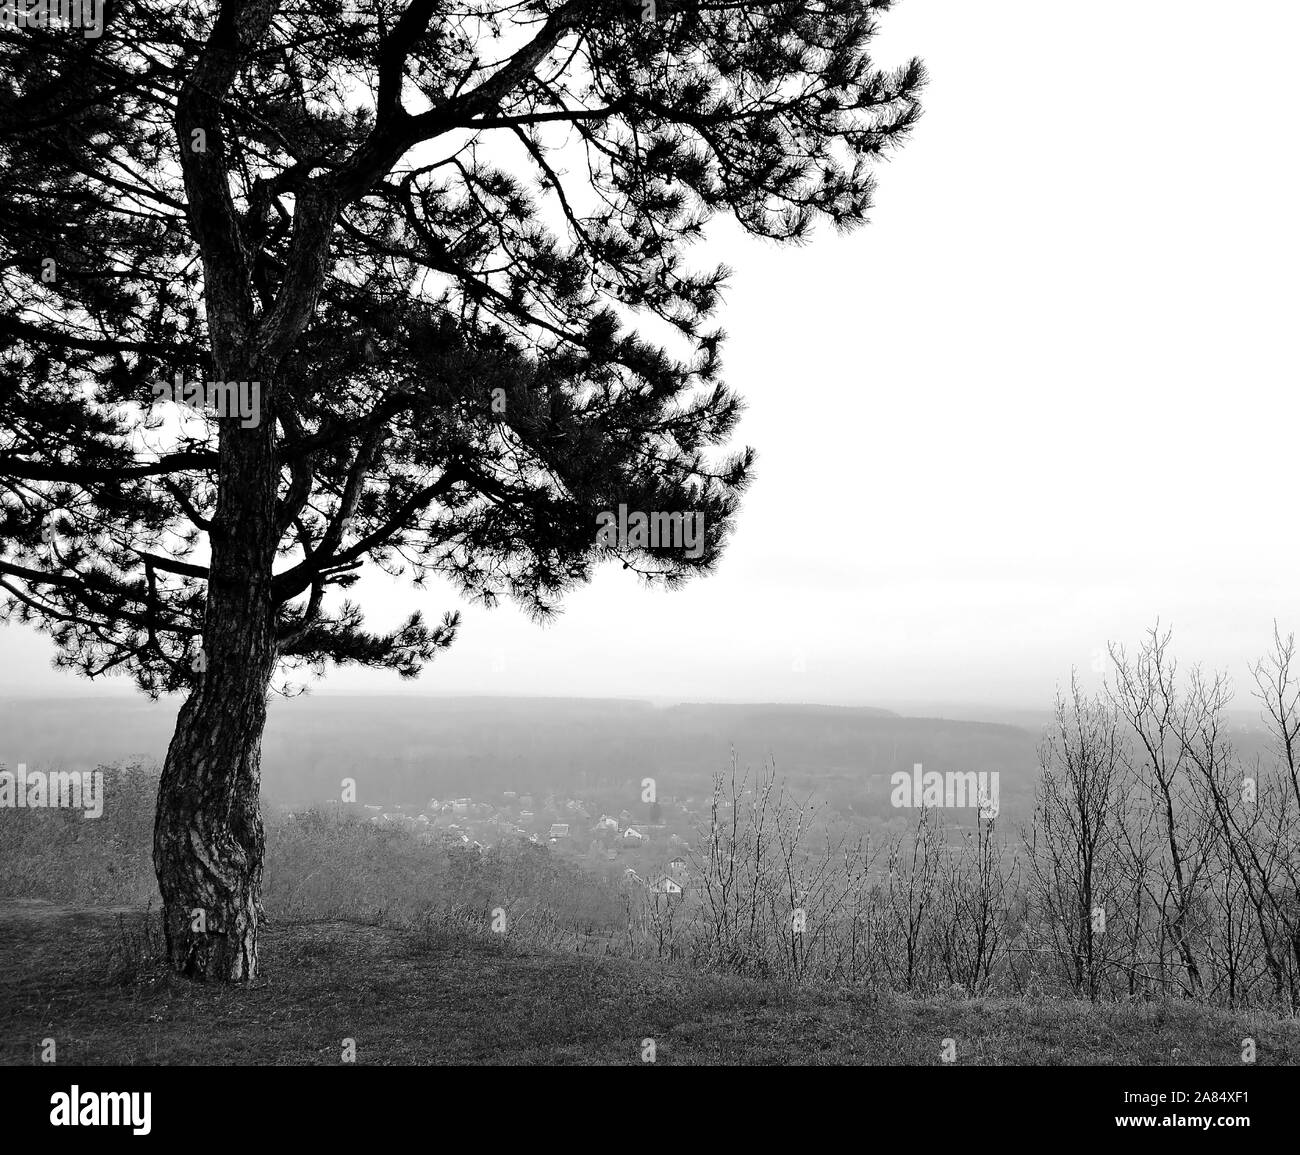 The photo shows a monochrome autumn landscape with a single pine tree on a hill and a village in the fog. Stock Photo